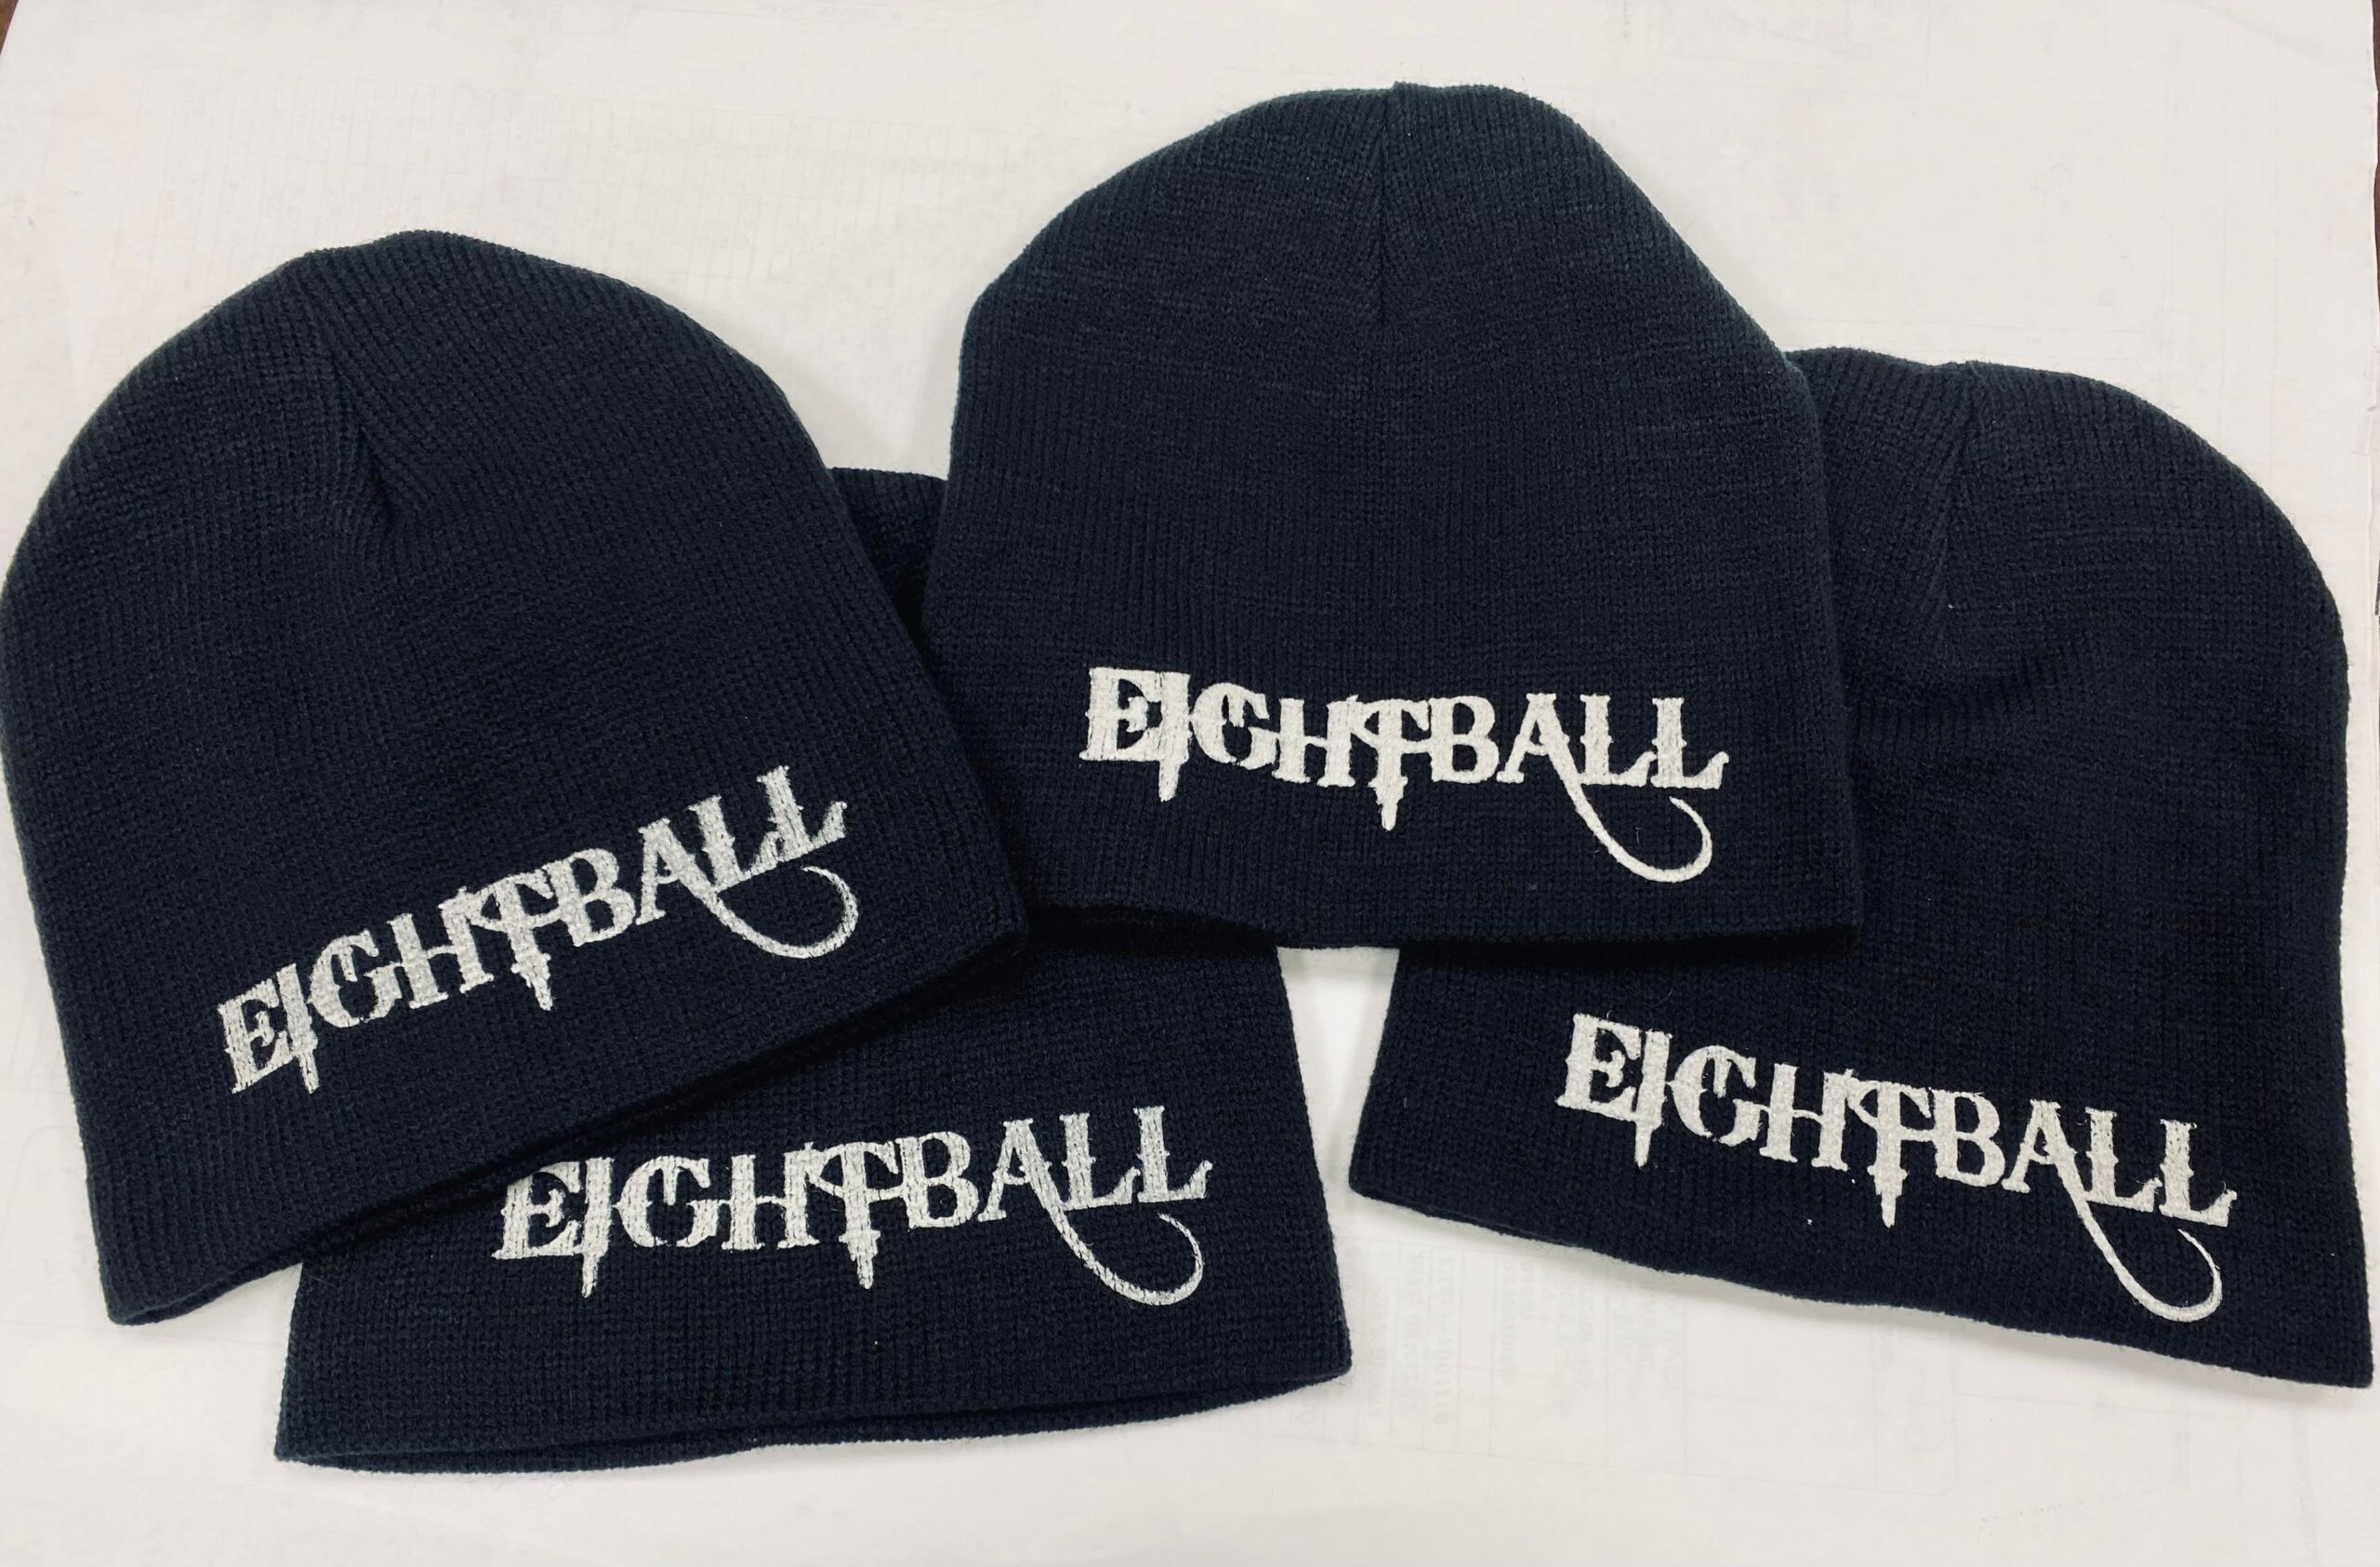 Eightball "Stitched" Beanies